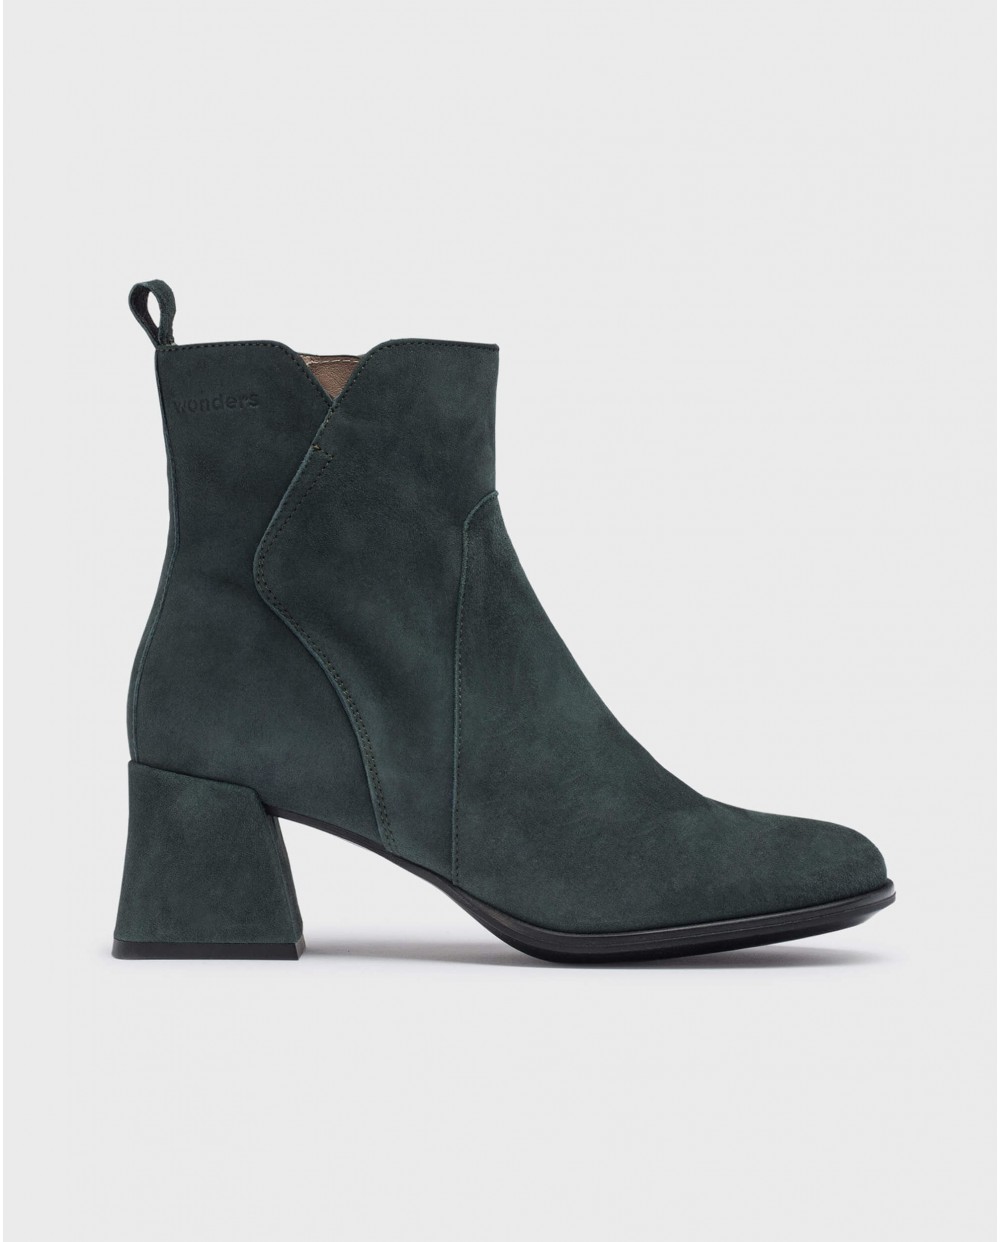 Wonders-Ankle Boots-Green MARINE ankle boot